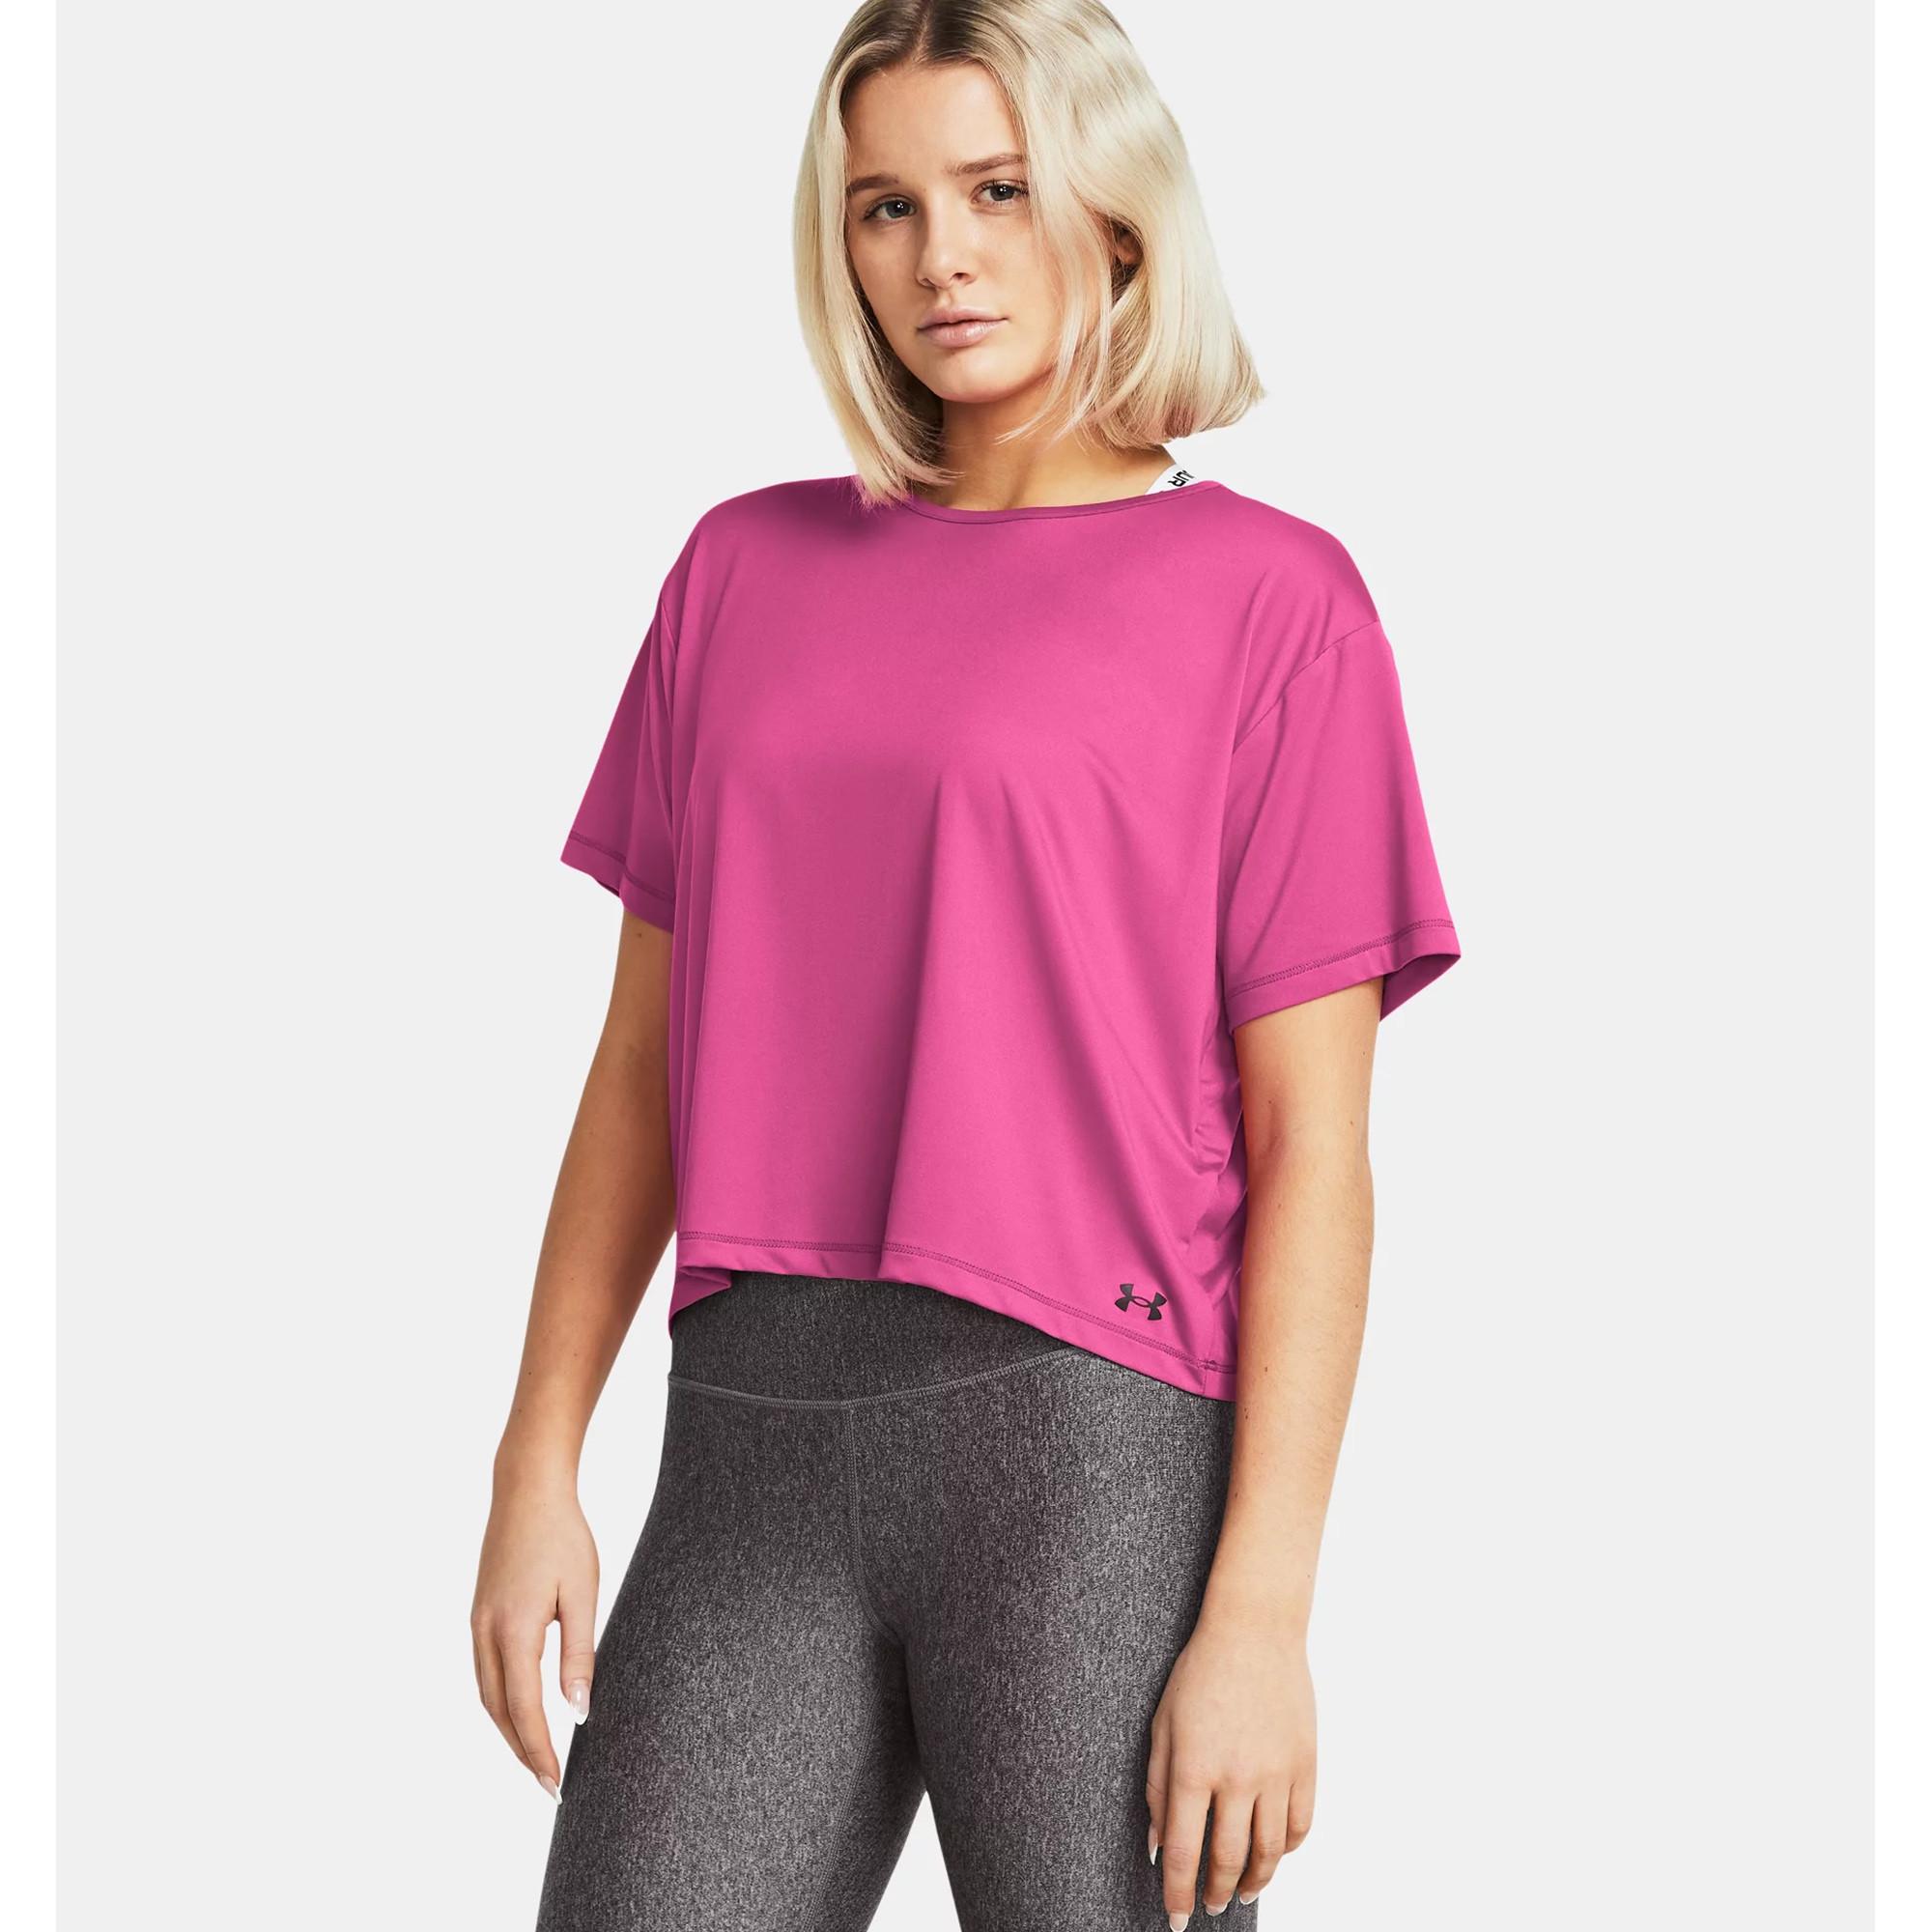 UNDER ARMOUR Motion SS T-shirt, Oversized Fit, manches courtes 